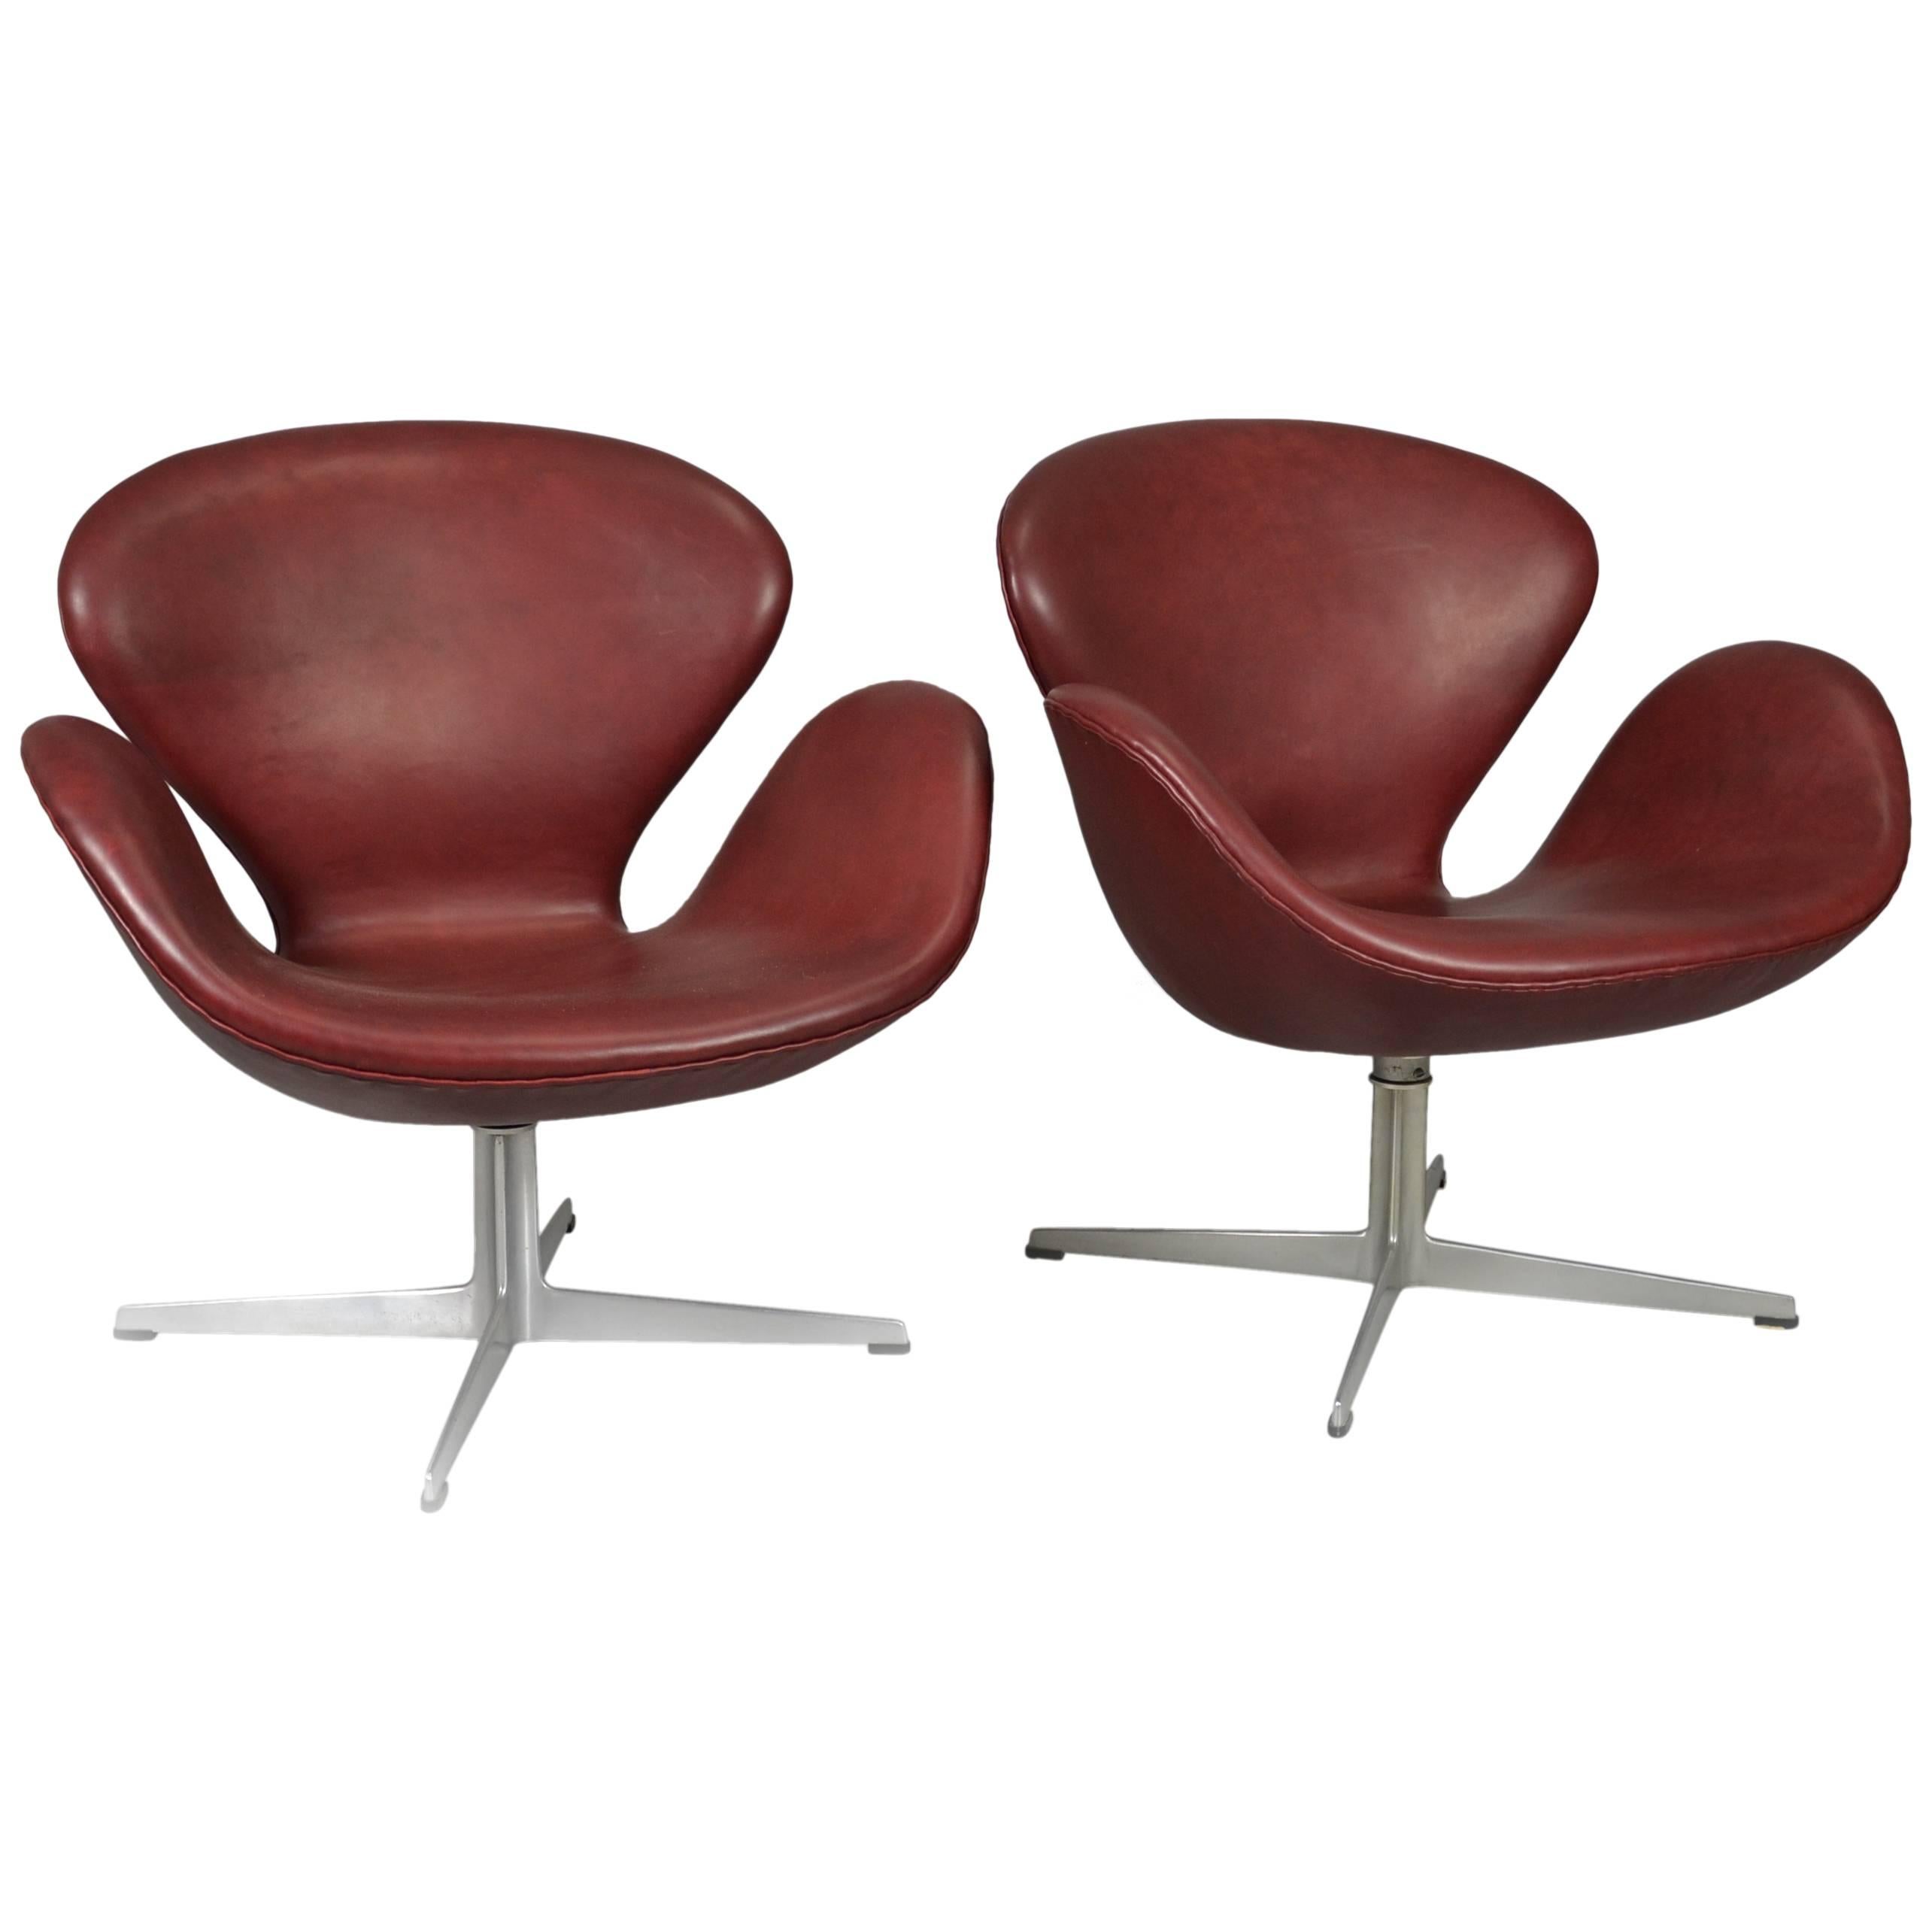 Pair of Swan Chairs by Arne Jacobsen in Bordeaux Leather